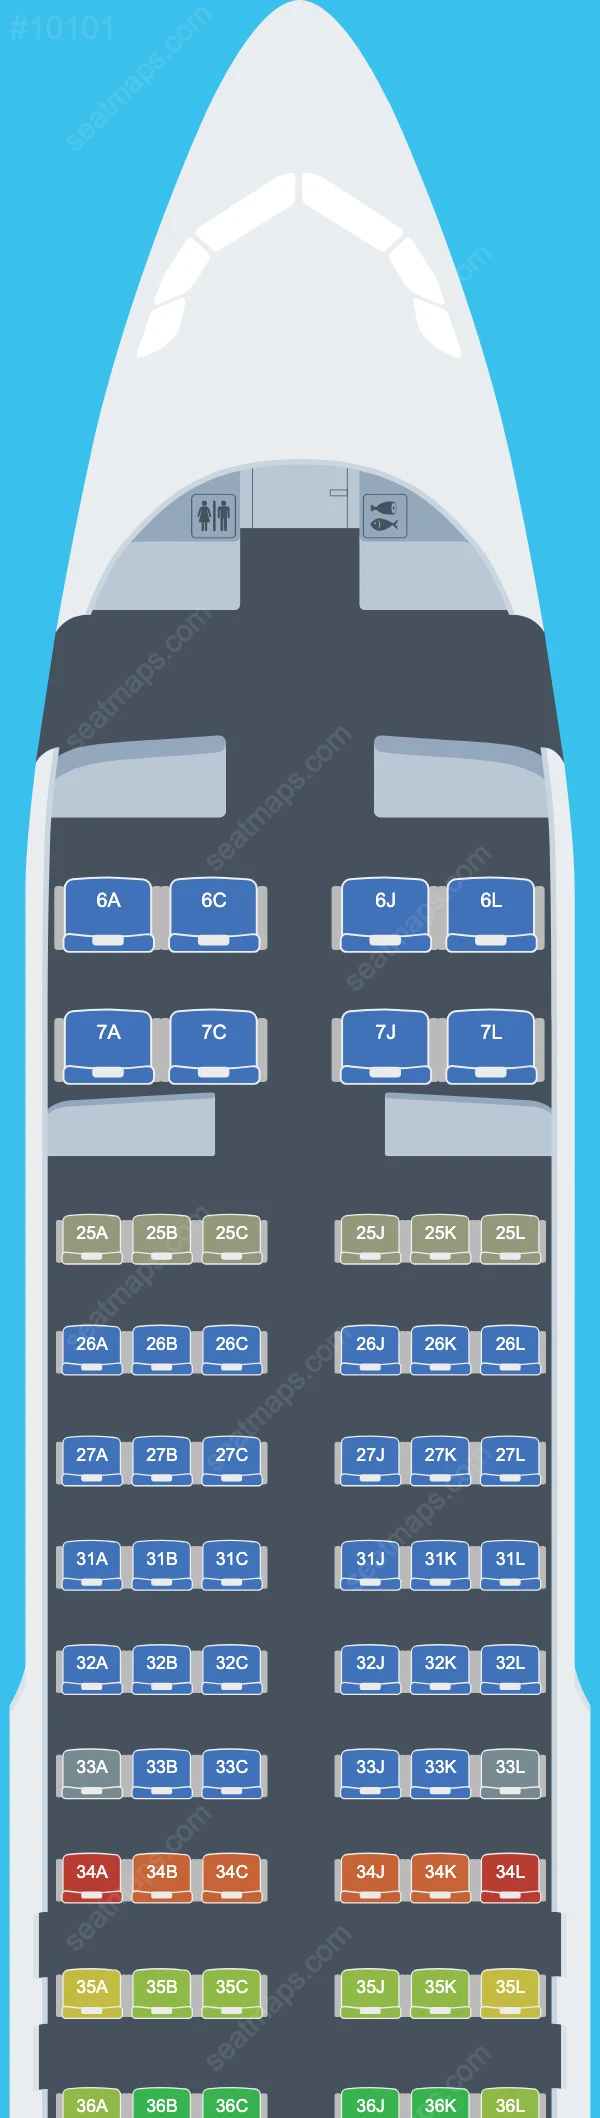 China Eastern Airbus A320 Seat Maps A320-200neo